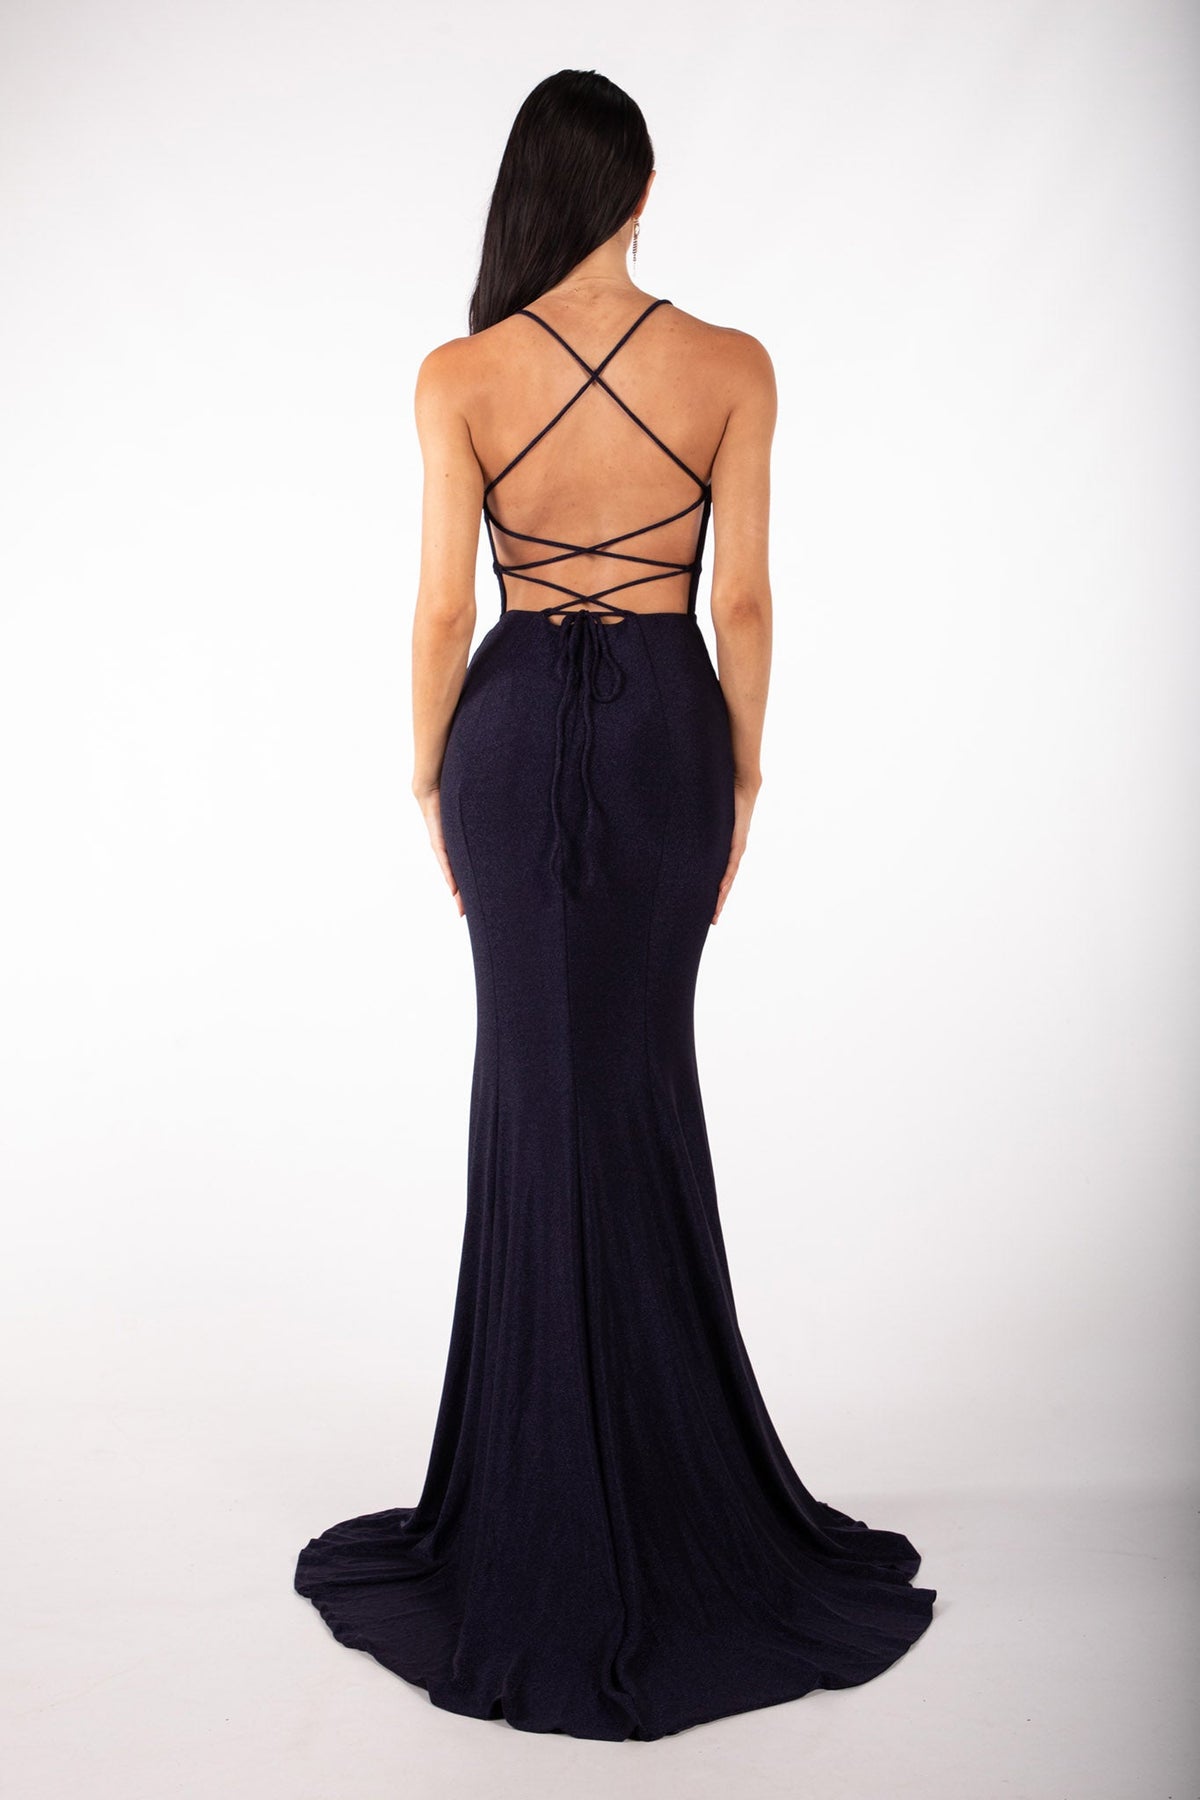 Lace Up Open Back and Small Train Design of Shimmer Navy Deep Blue Maxi Evening Gown with V Neck, Side Split